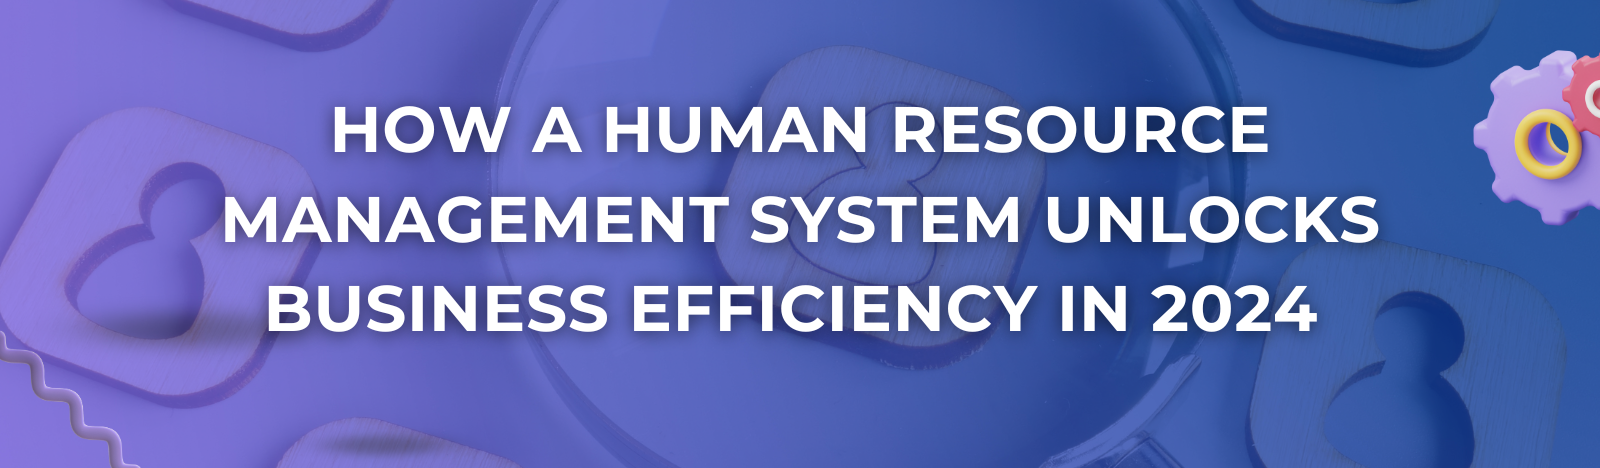 How a Human Resource Management System Unlocks Business Efficiency in 2024